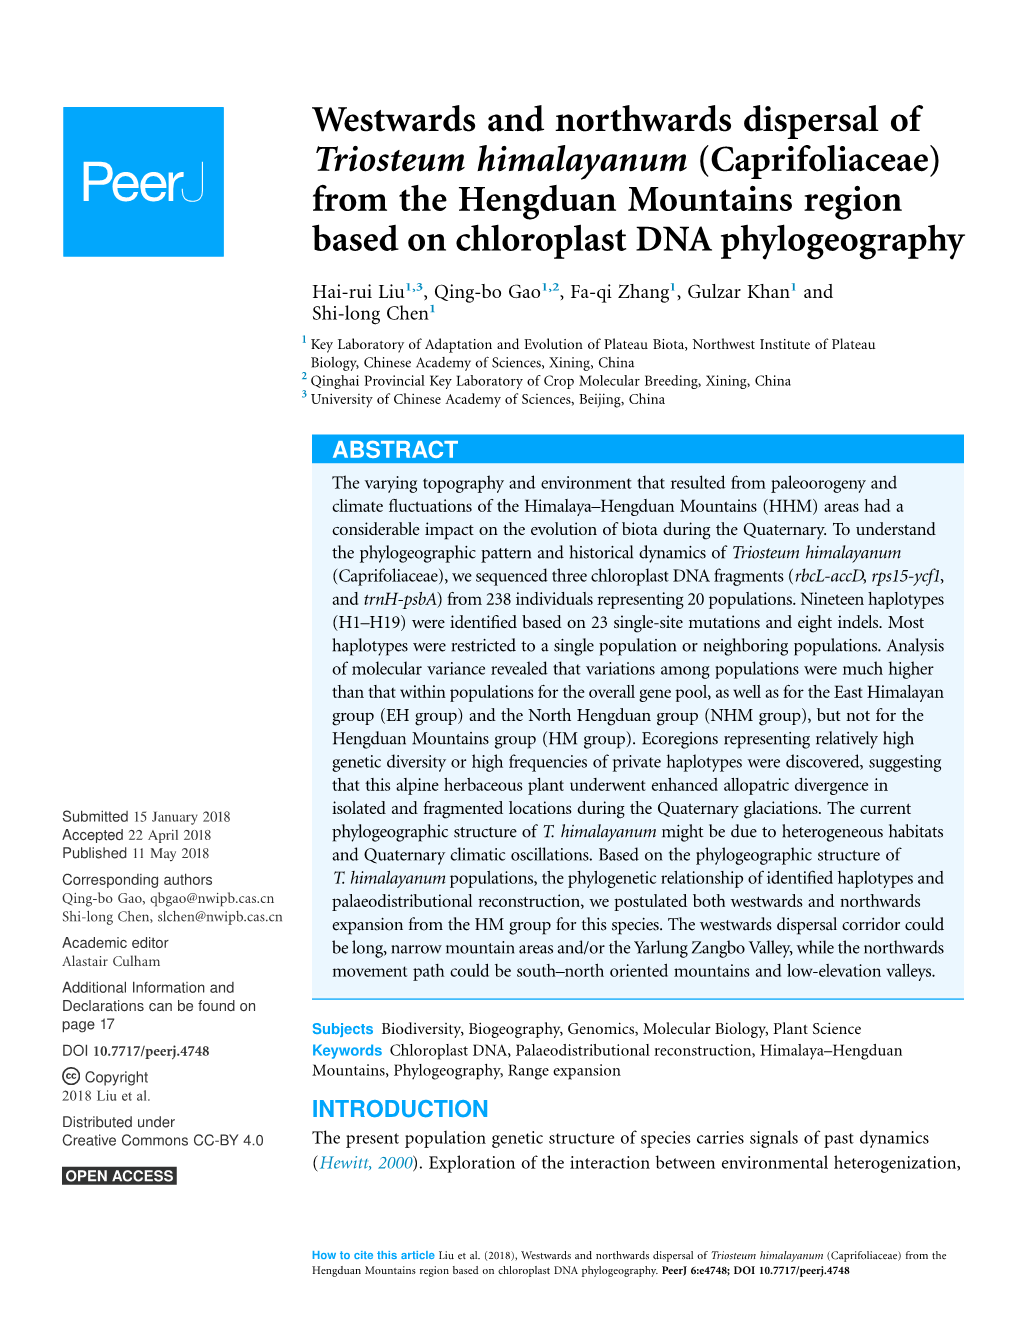 Westwards and Northwards Dispersal of Triosteum Himalayanum (Caprifoliaceae) from the Hengduan Mountains Region Based on Chloroplast DNA Phylogeography